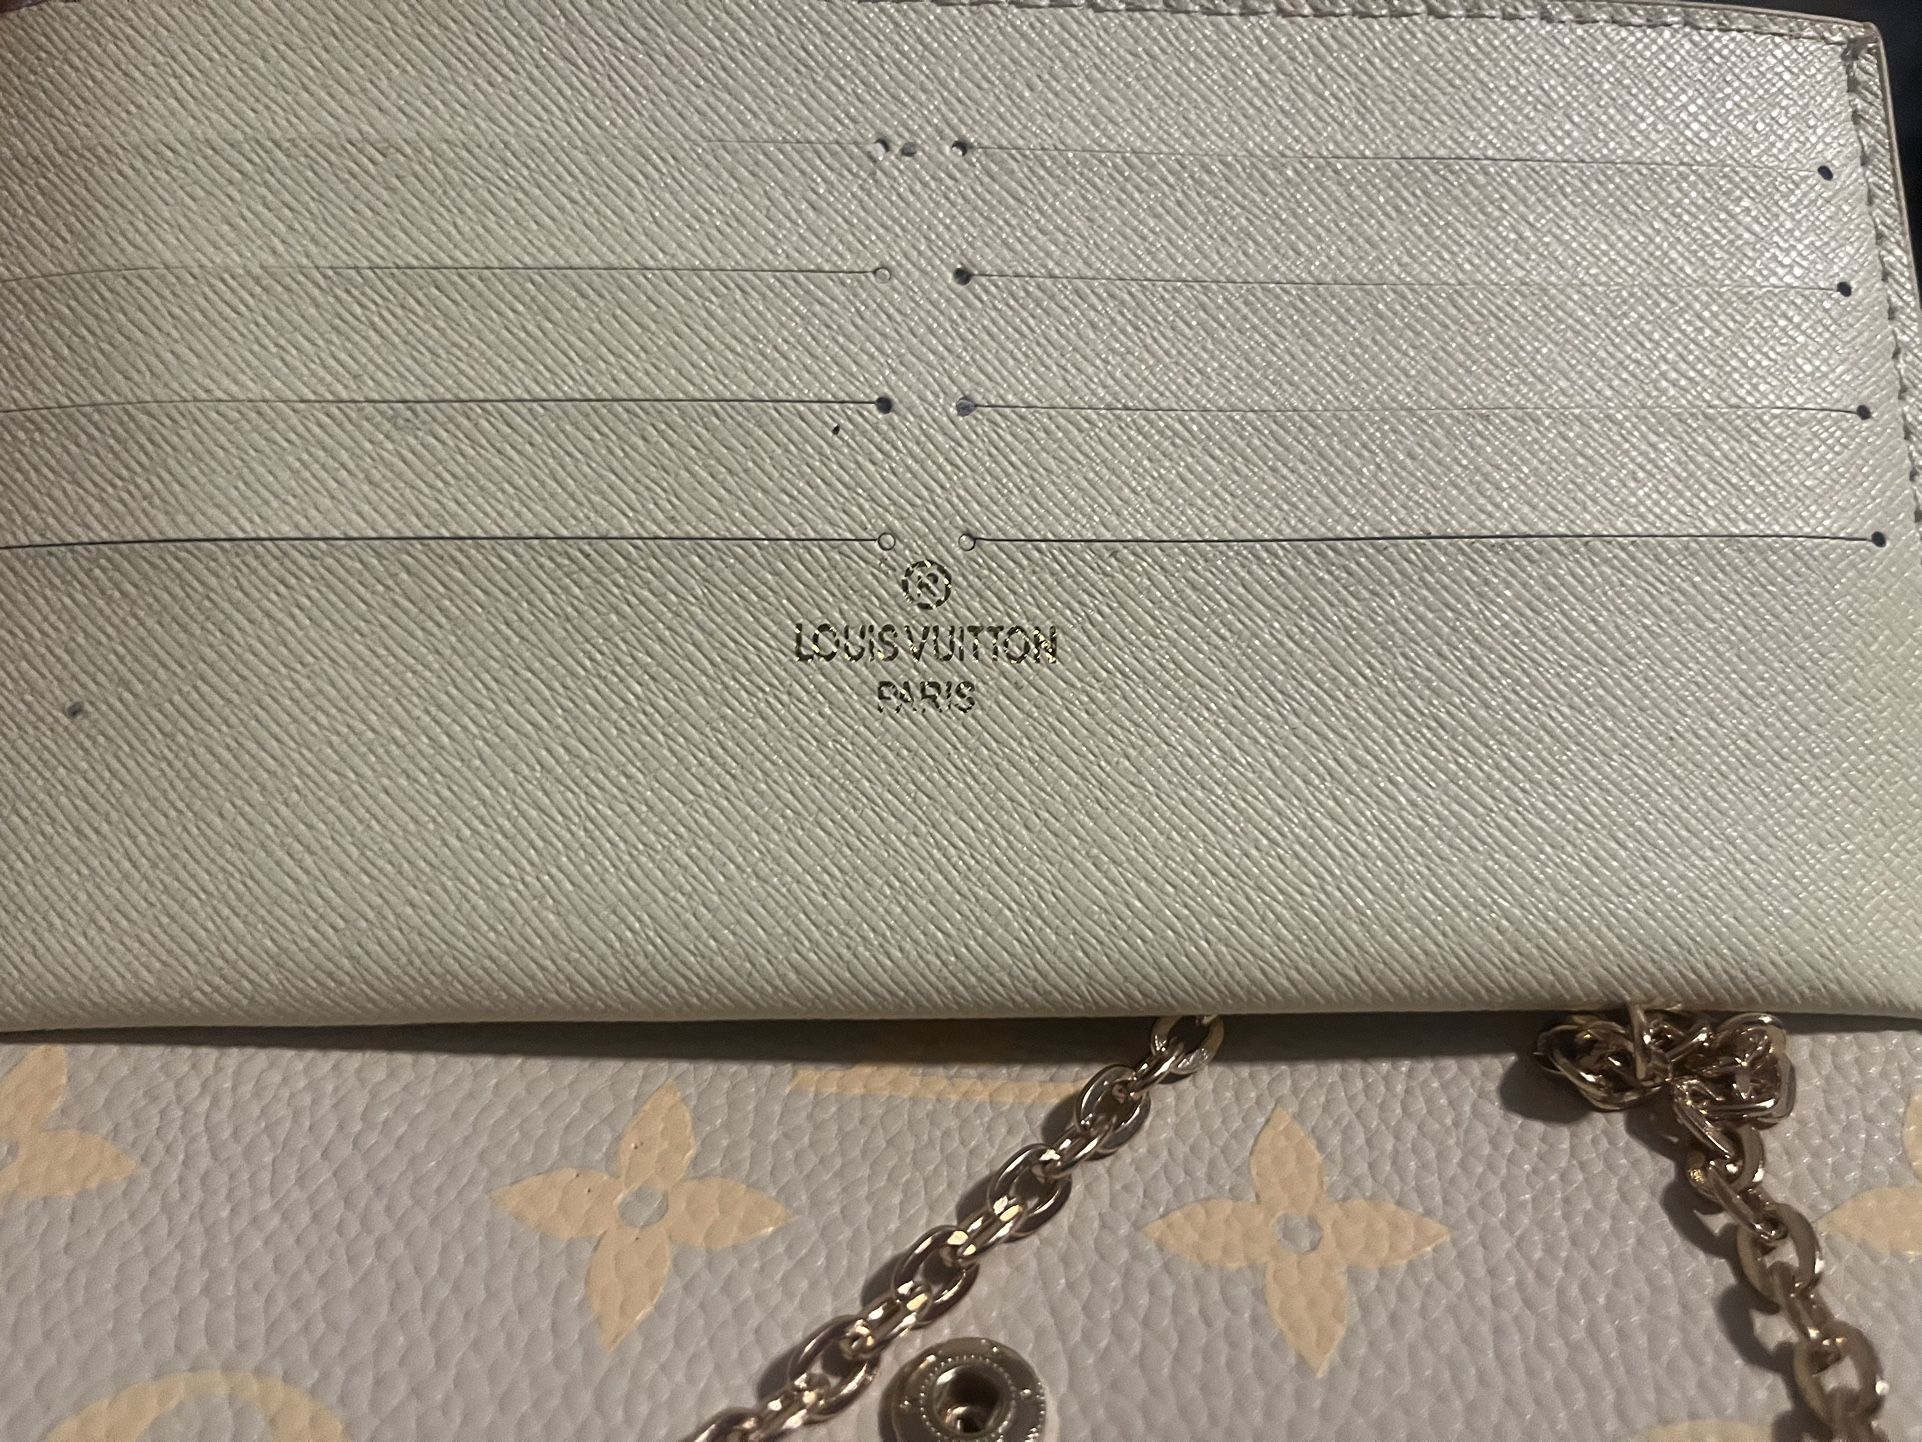 Lv Purse W. Matching Wallet. for Sale in Fort Lauderdale, FL - OfferUp